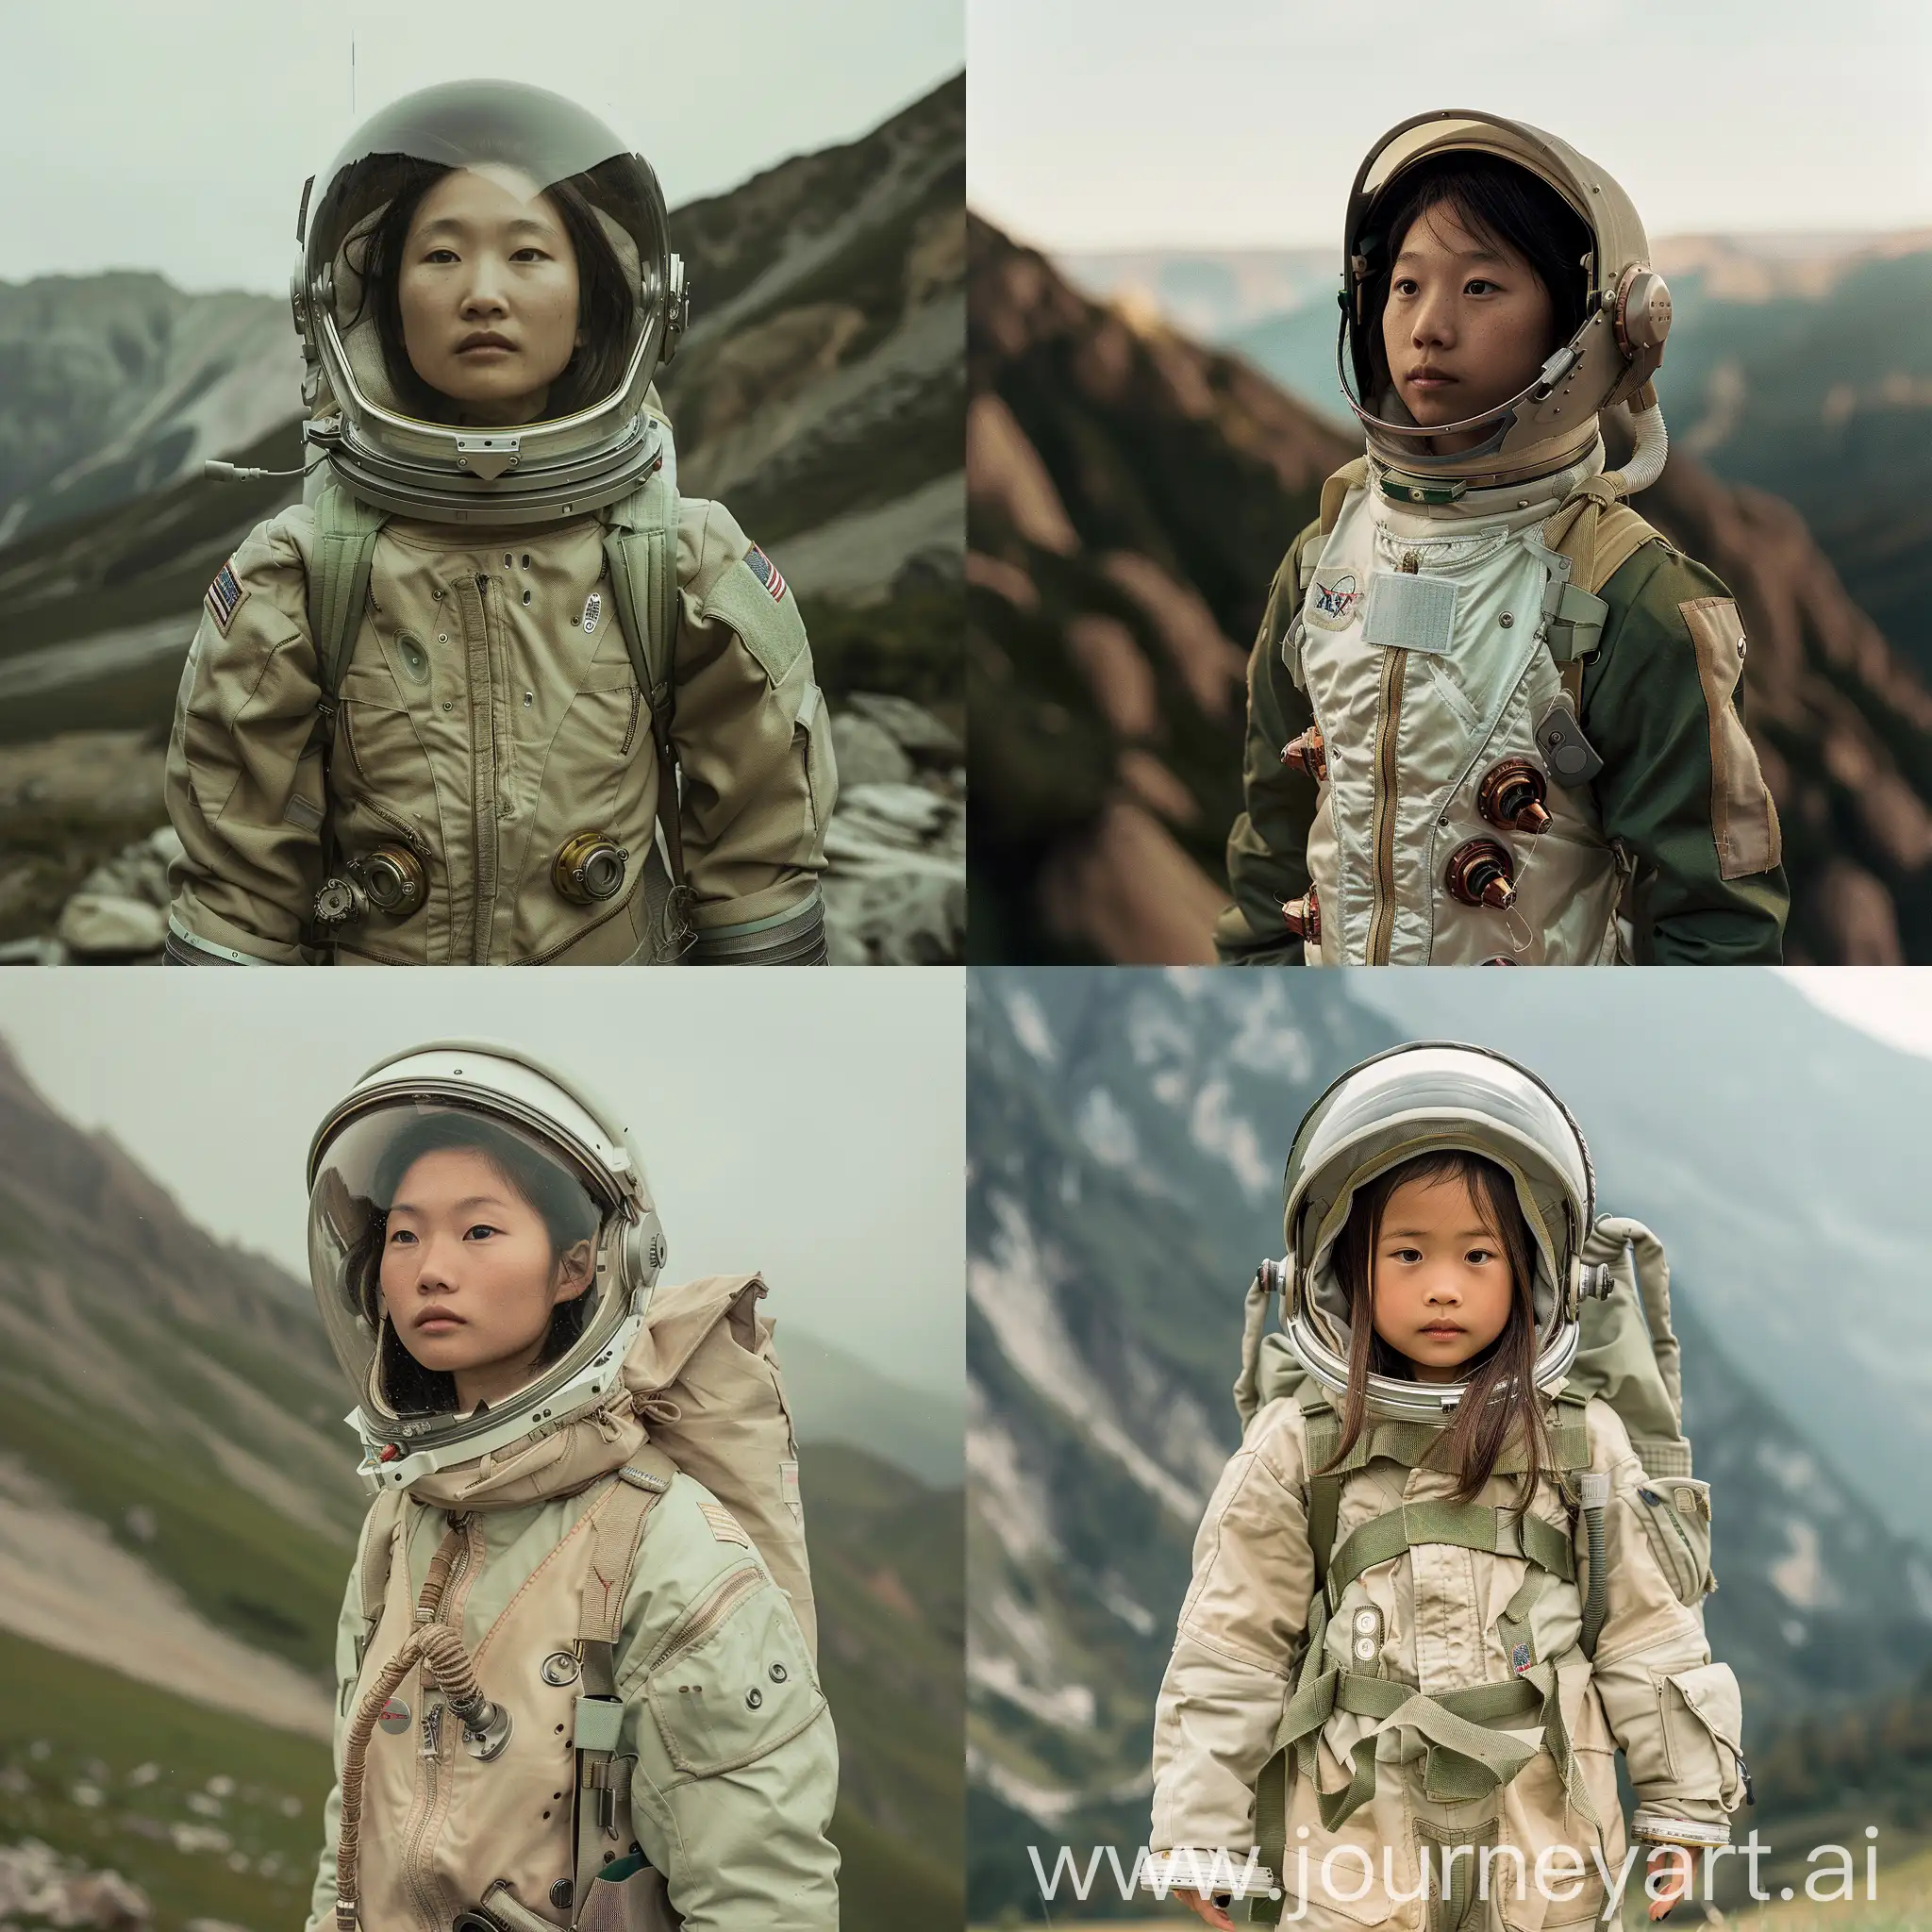 Captivating-Documentary-Portrait-of-Asian-Girl-in-Spacesuit-Amid-Mountainous-Landscape